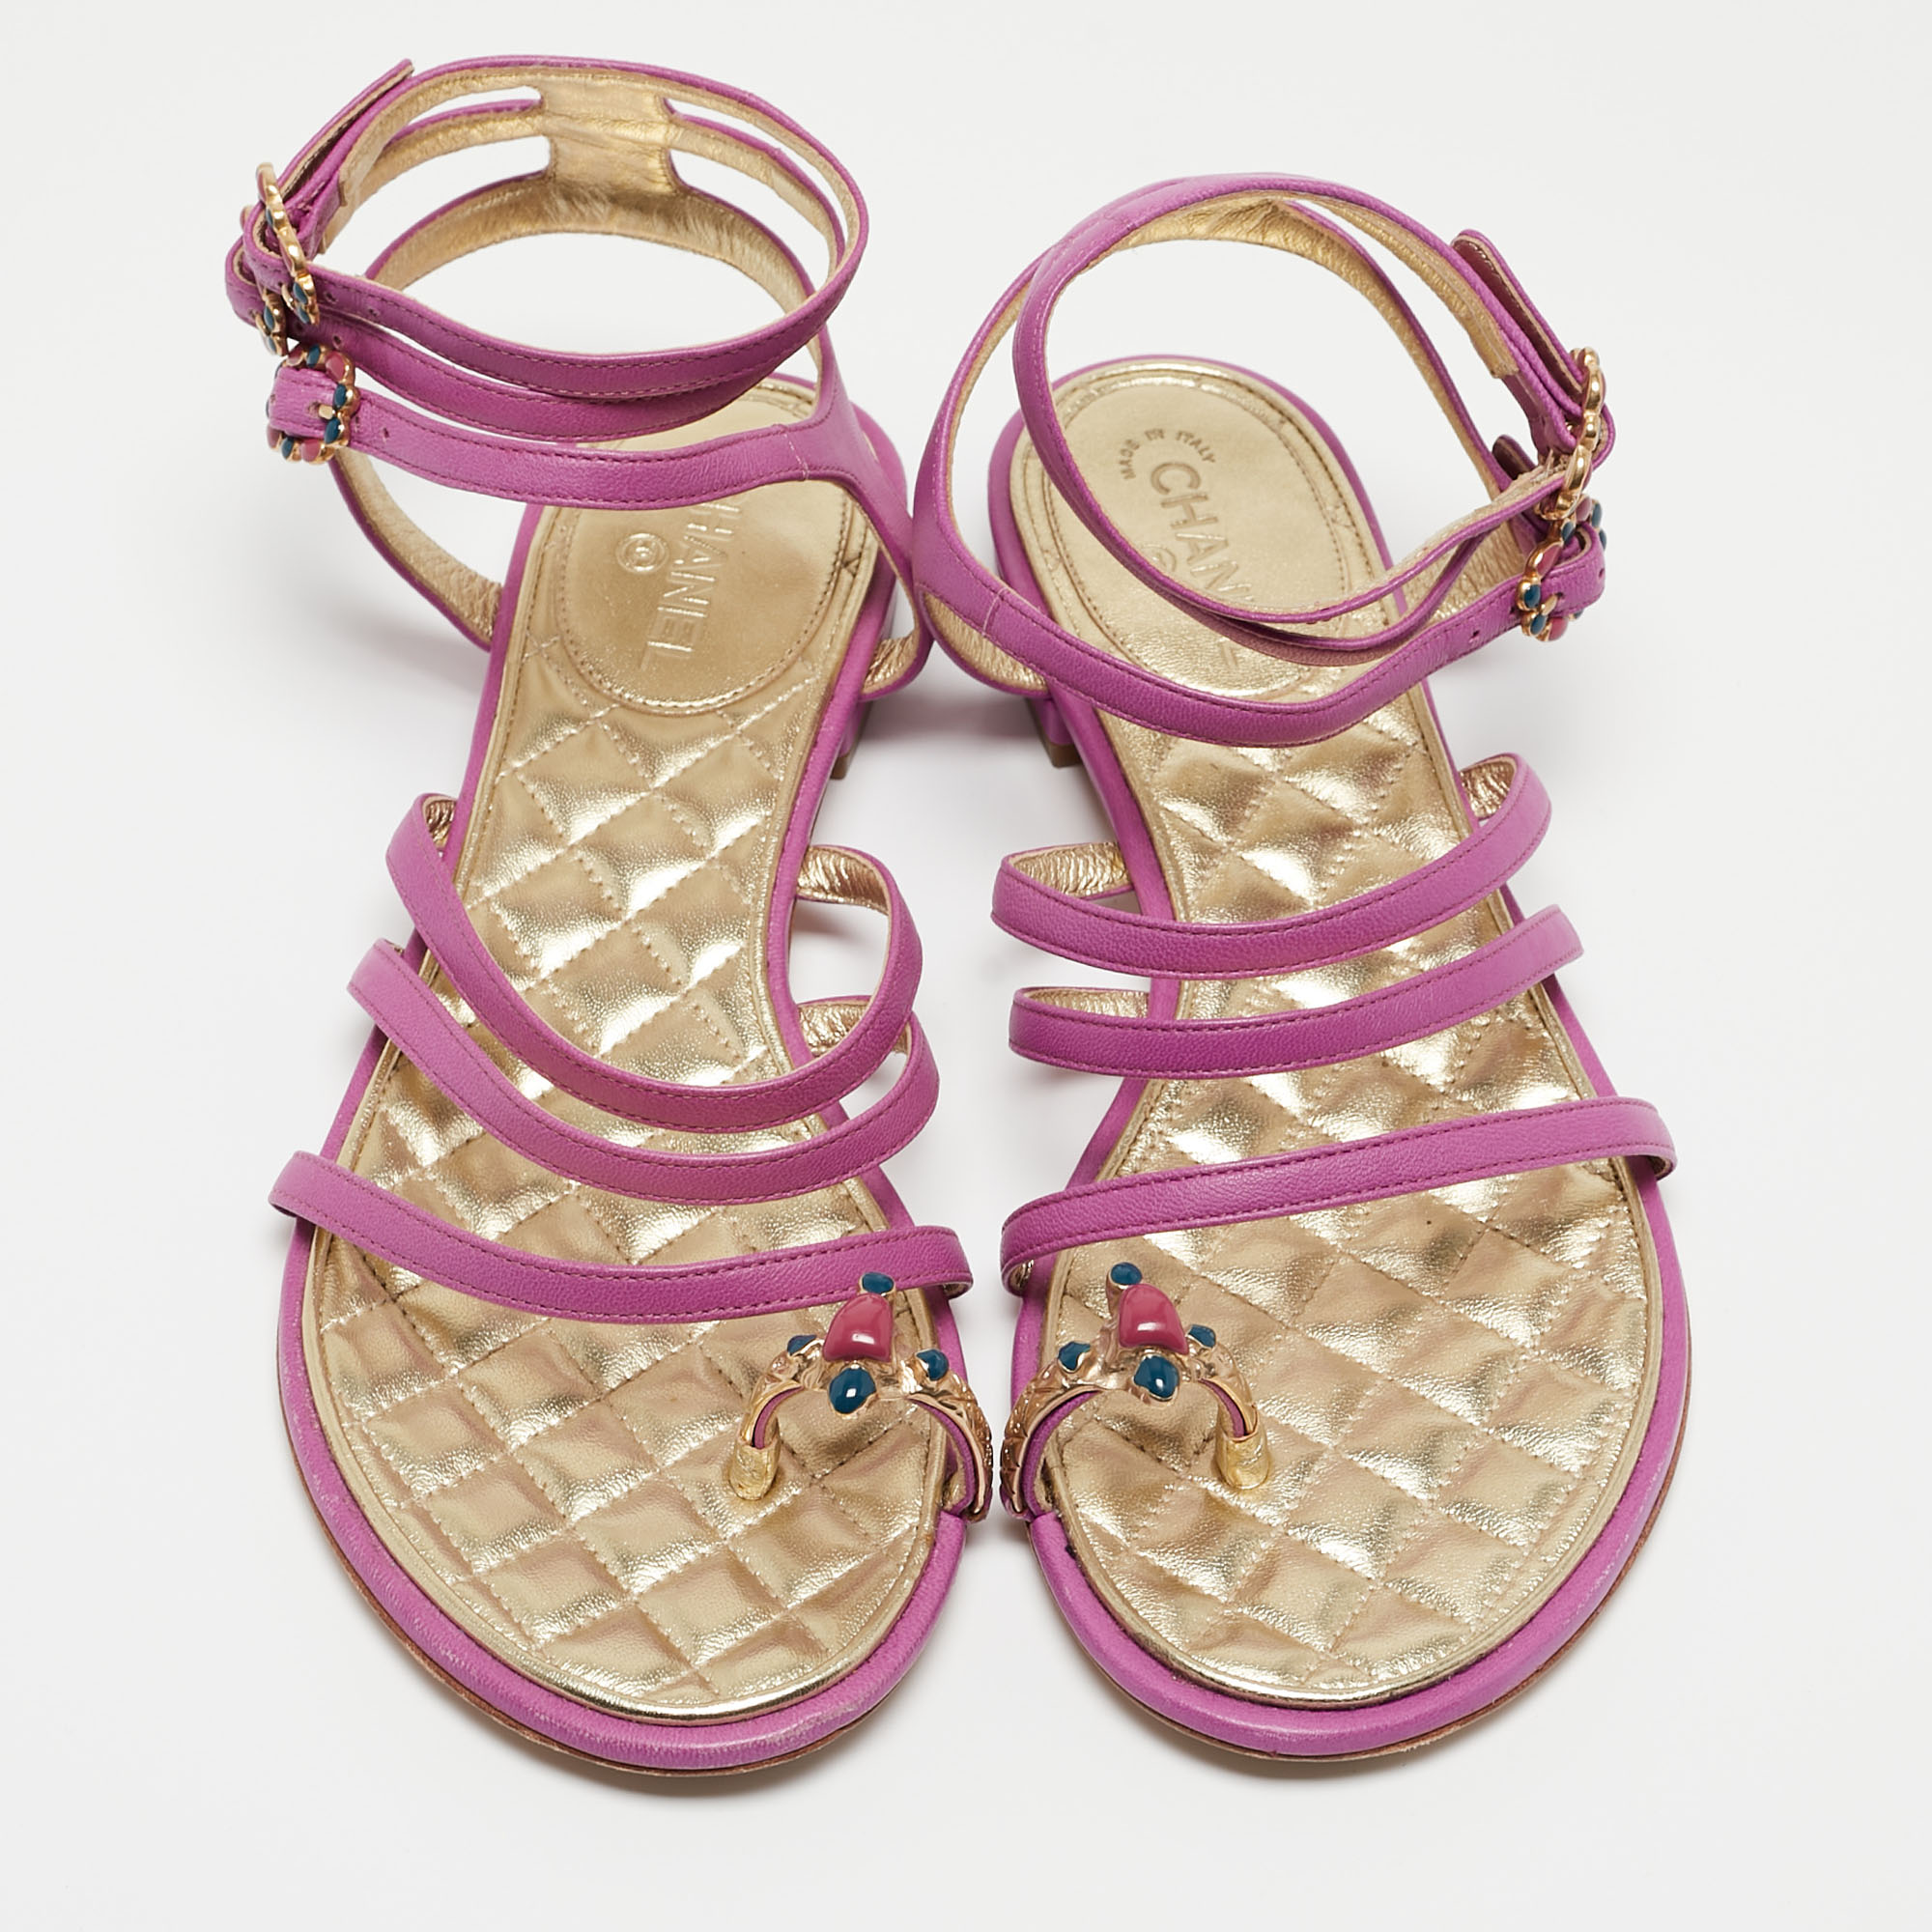 Chanel Purple Leather Embellished Toe Ring Ankle Strap Flat Sandals Size 36.5